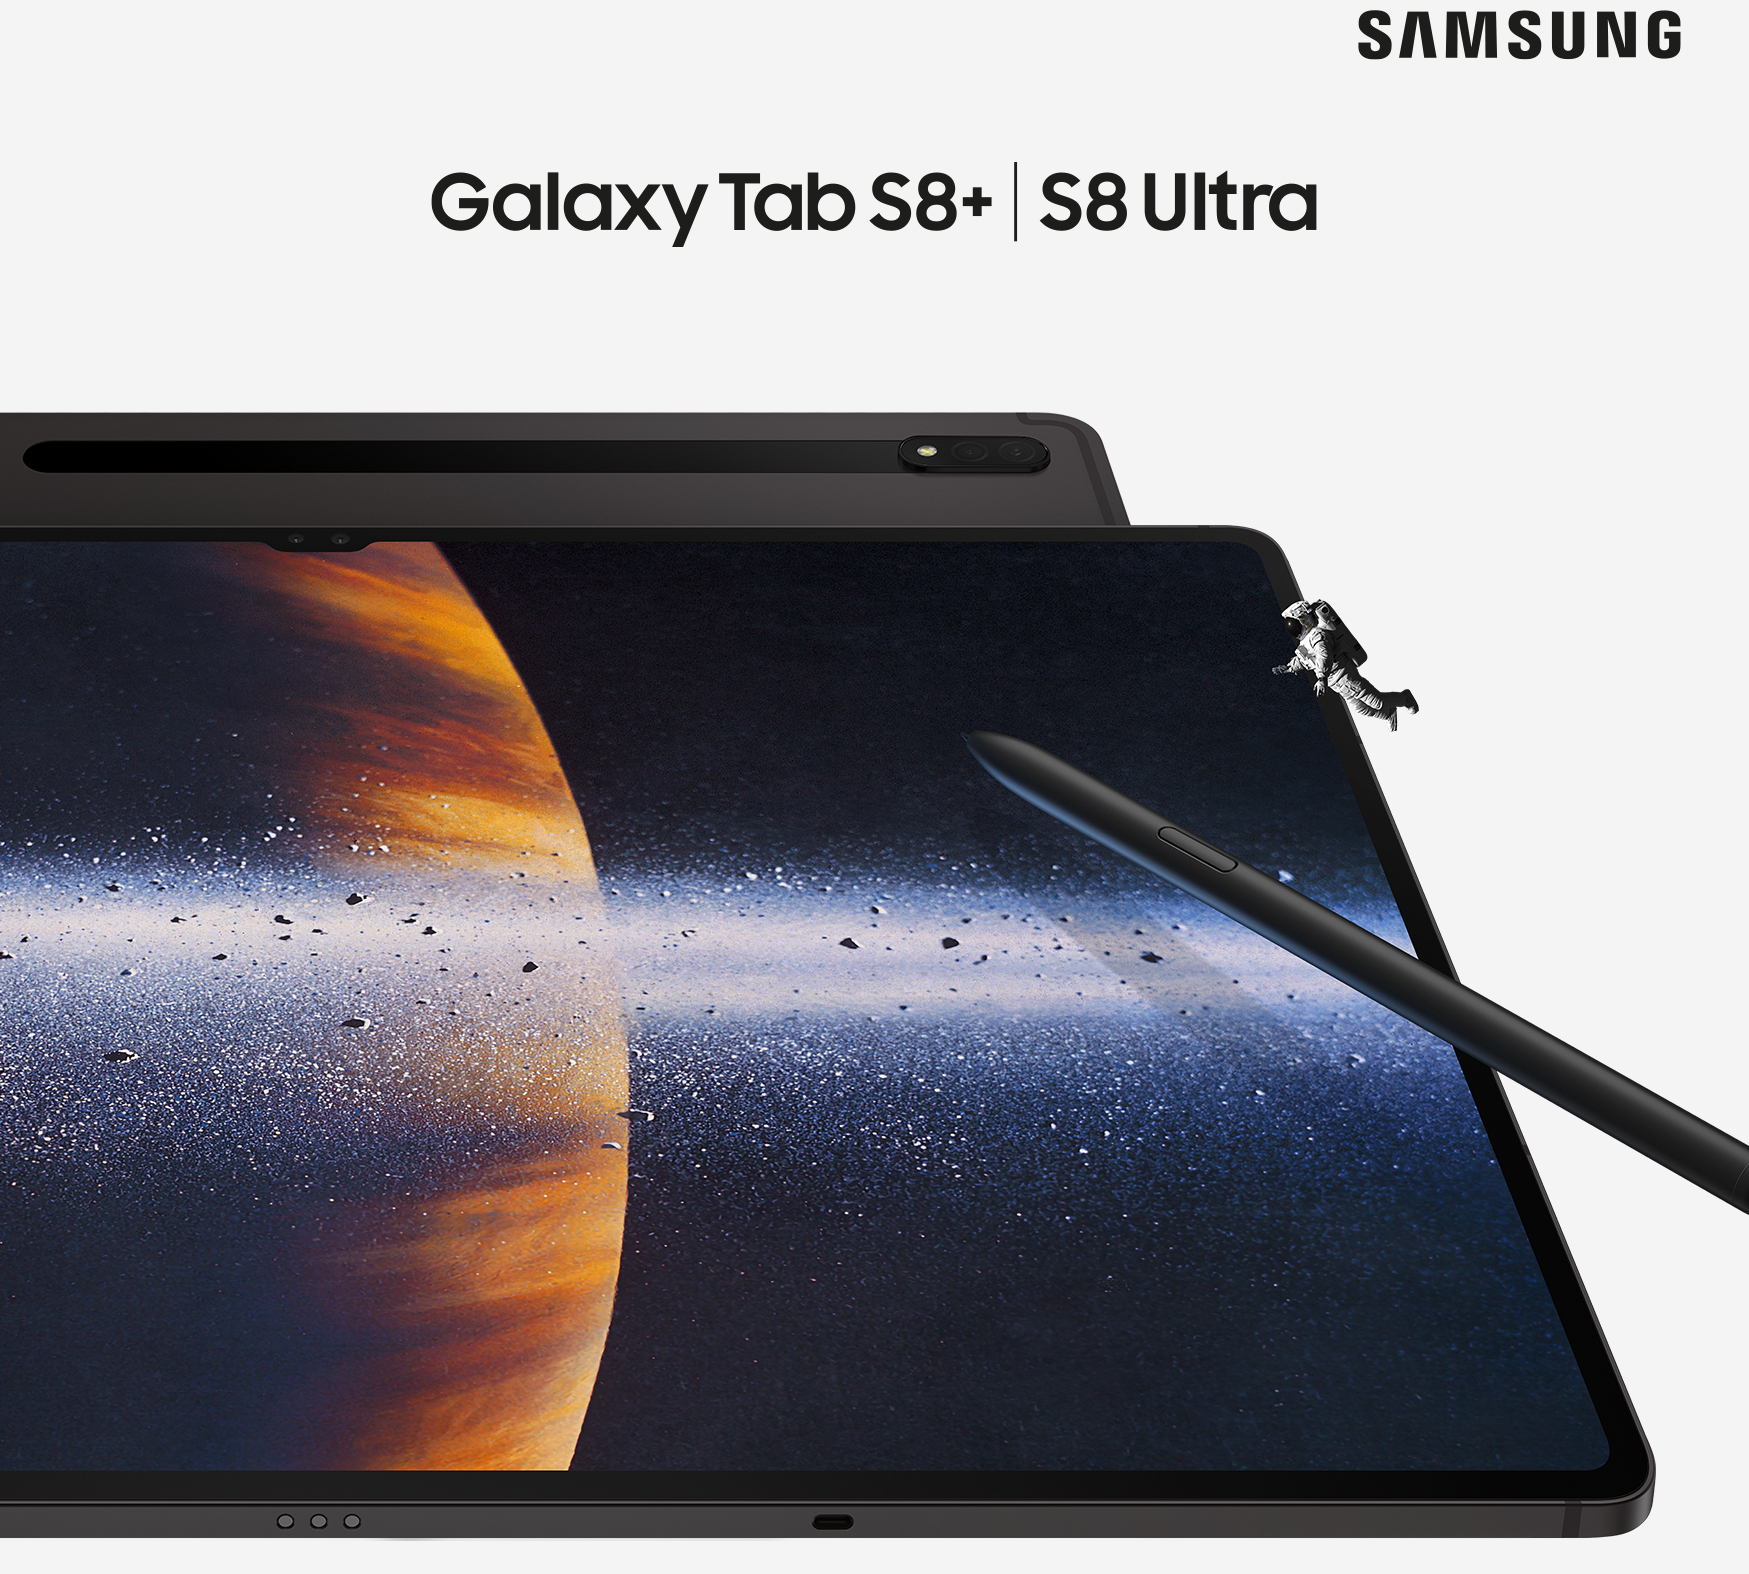 Introducing the Samsung Tab S8 series